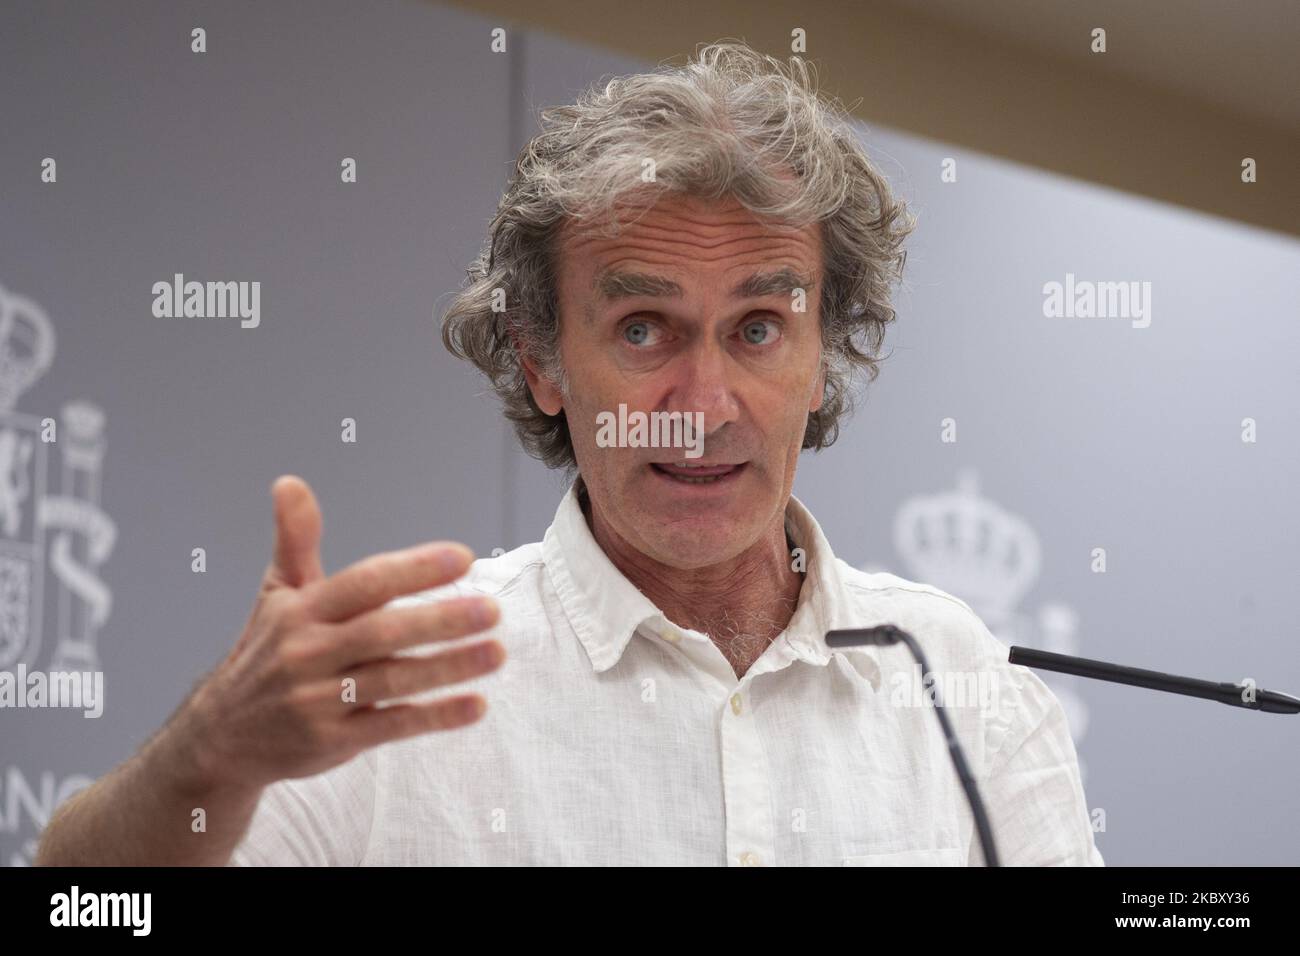 The director of the Coordination Center for Health Alerts and Emergencies Fernando Simon speaks during a press conference on the evolution of the COVID-19 convened at the Ministry of Health, on August 31, 2020 in Madrid, Spain. (Photo by Oscar Gonzalez/NurPhoto) Stock Photo